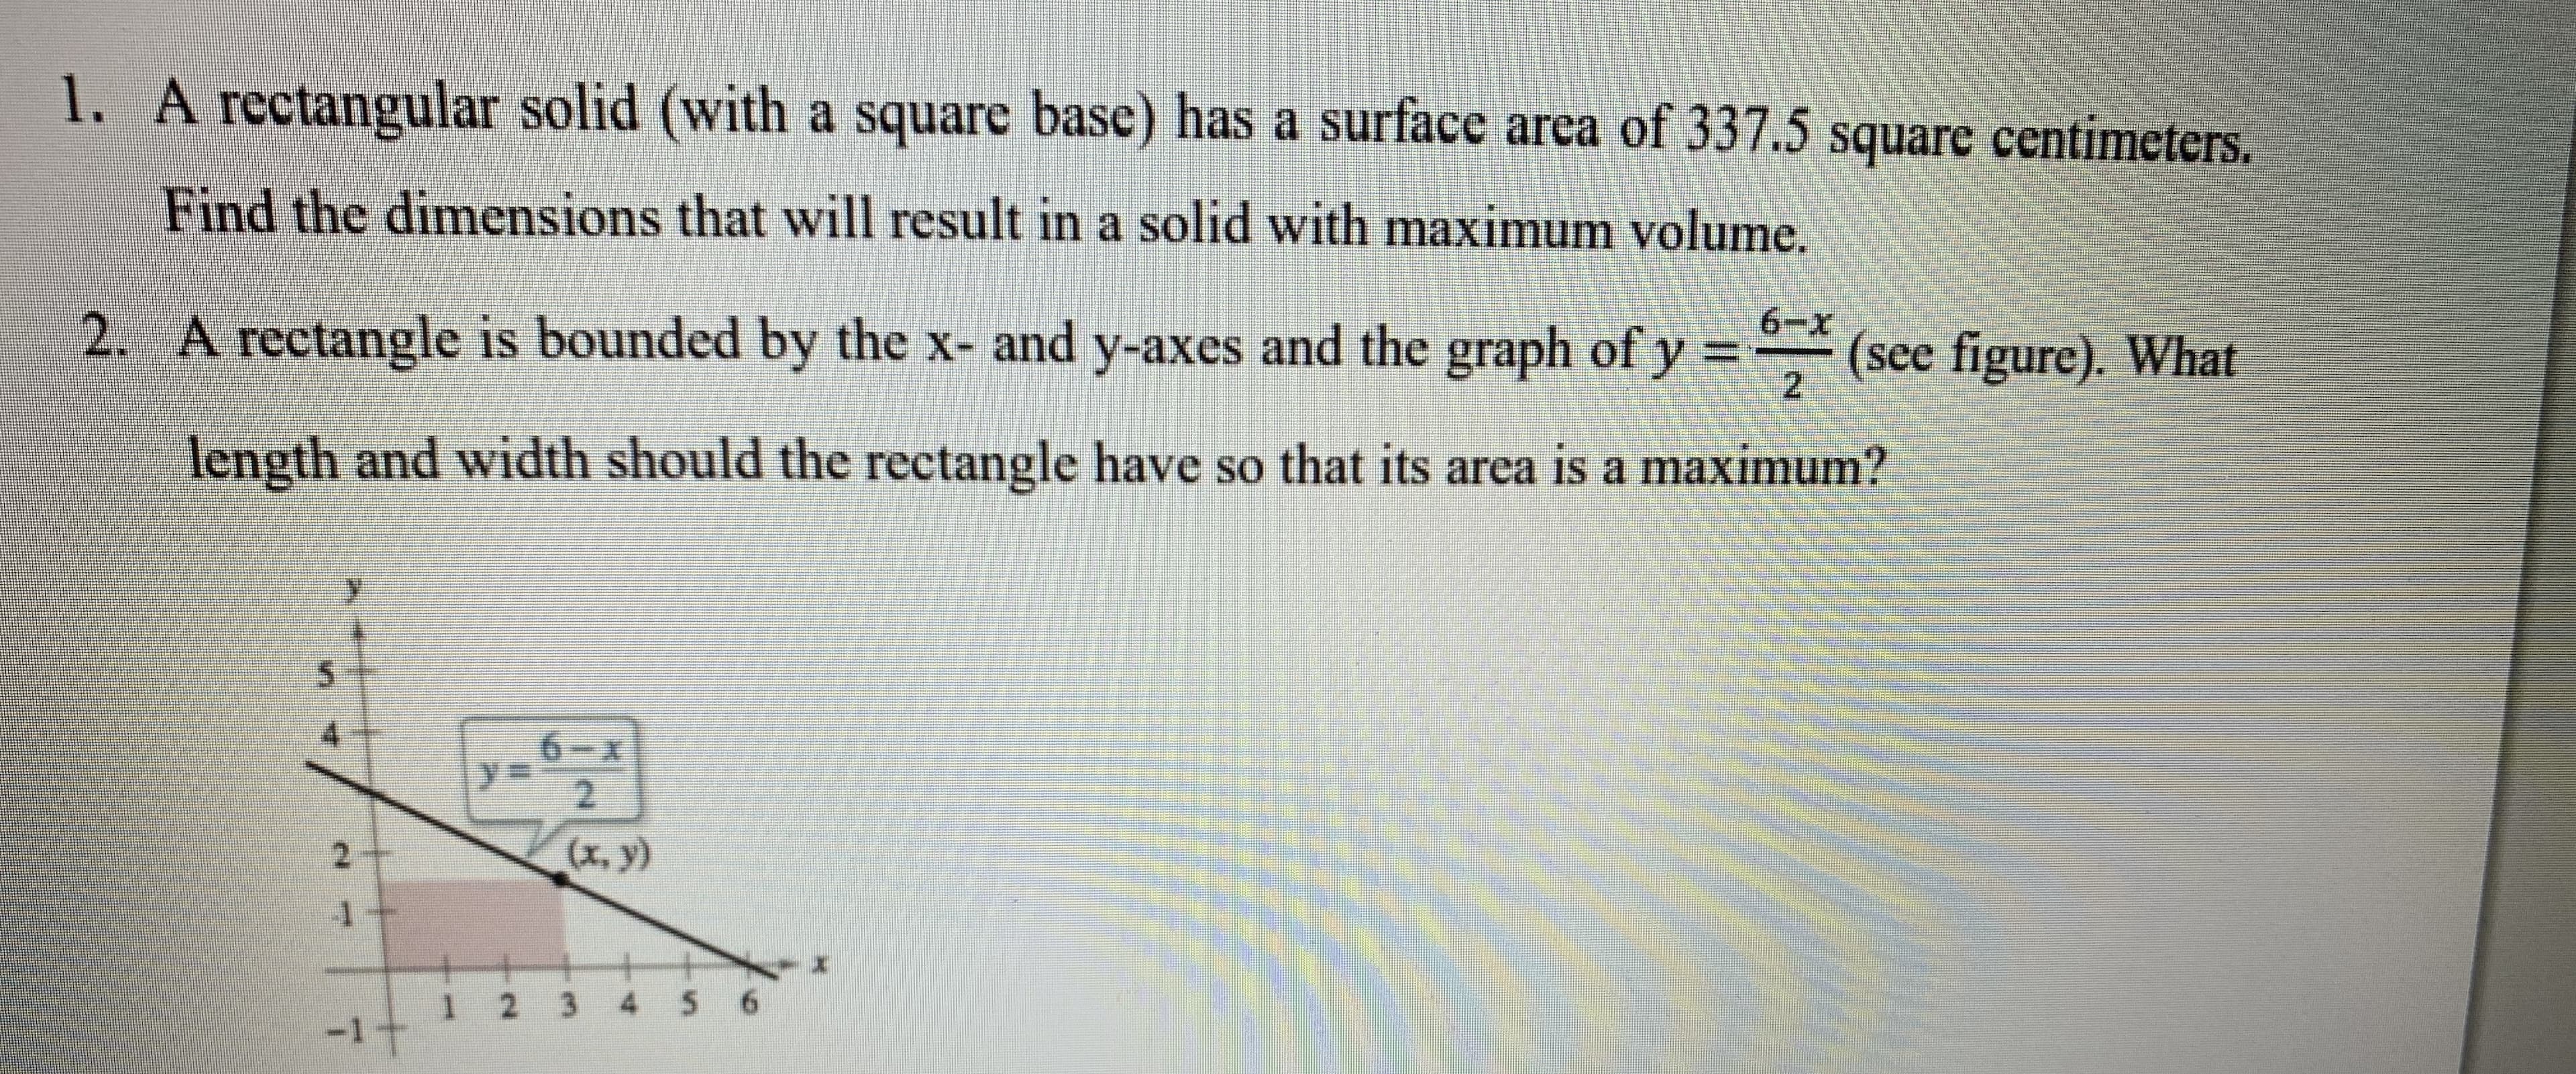 1. A rectangular solid (with a square base) has a surface area of 337.5 square centimeters.
Find the dimensions that will result in a solid with maximum volume.
2. A rectangle is bounded by the x- and y-axes and the graph of y = (see figure). What
length and width should the rectangle have so that its area is a maximum?
6.
2.
(x, y)
4 5 6
1 2 3
-1t
